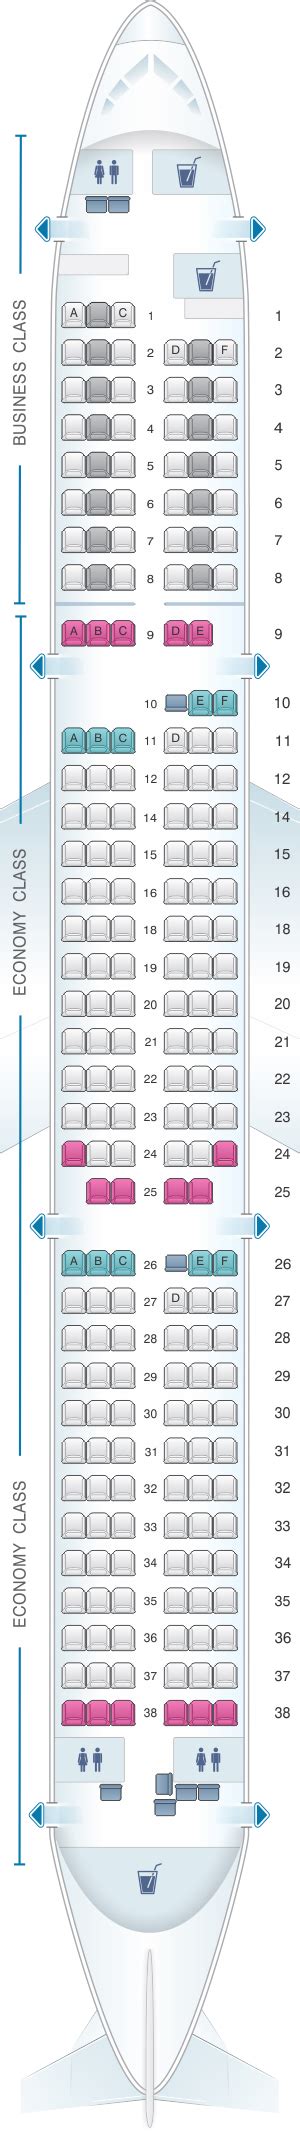 Seats 224. Pitch 28-29". Width 18". Recline 3". LATAM Airlines's economy class on the Airbus A321-200 V.1 offers a practical solution for travelers. With 224 seats, it's a blend of cost-effectiveness and essential amenities. The in-flight entertainment keeps passengers engaged, and the dedicated crew ensures a satisfactory flight experience.. 